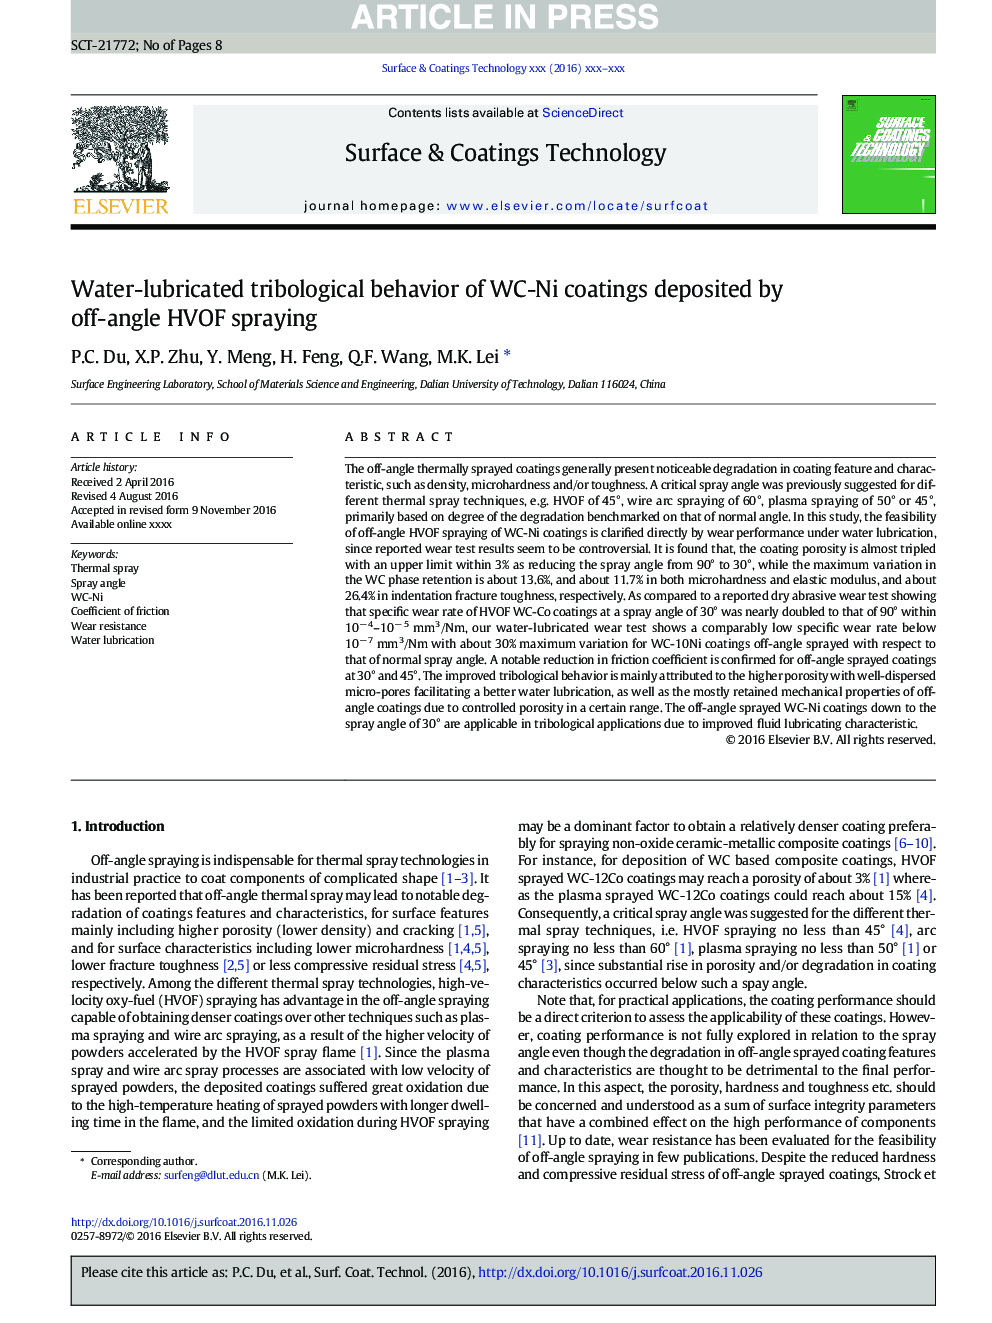 Water-lubricated tribological behavior of WC-Ni coatings deposited by off-angle HVOF spraying